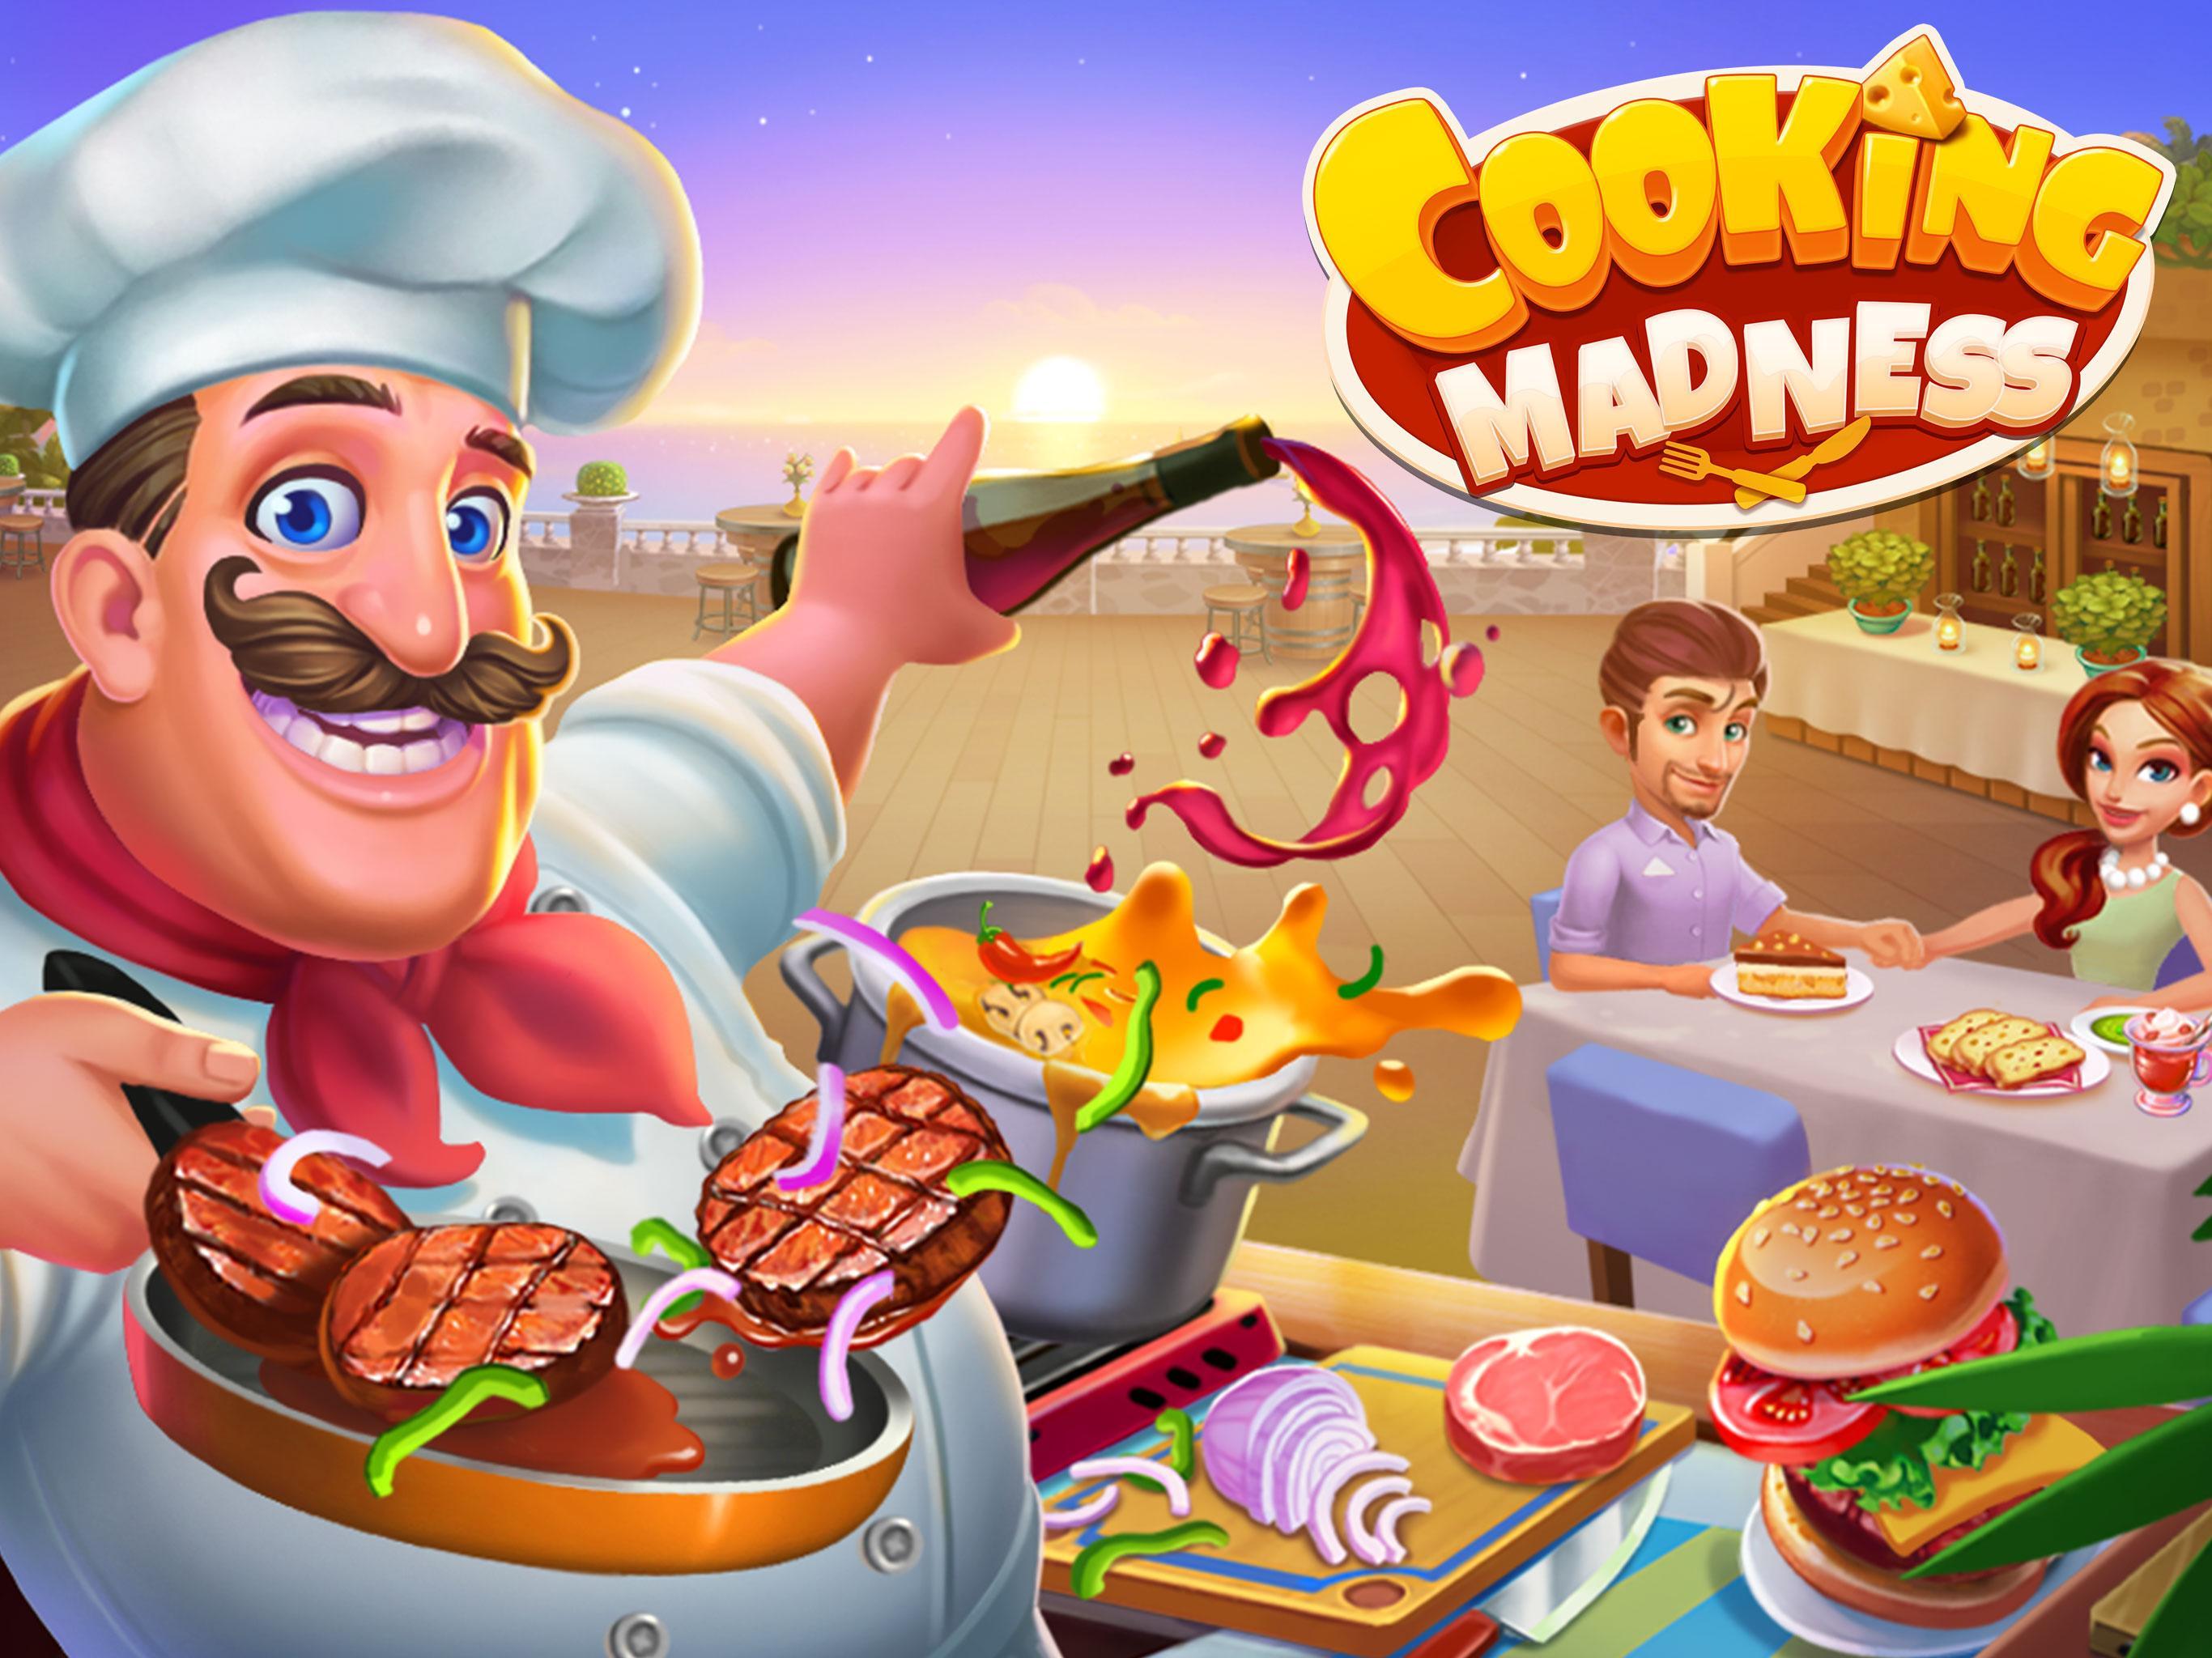 Cooking Madness - A Chef's Restaurant Games 1.7.2 Screenshot 9